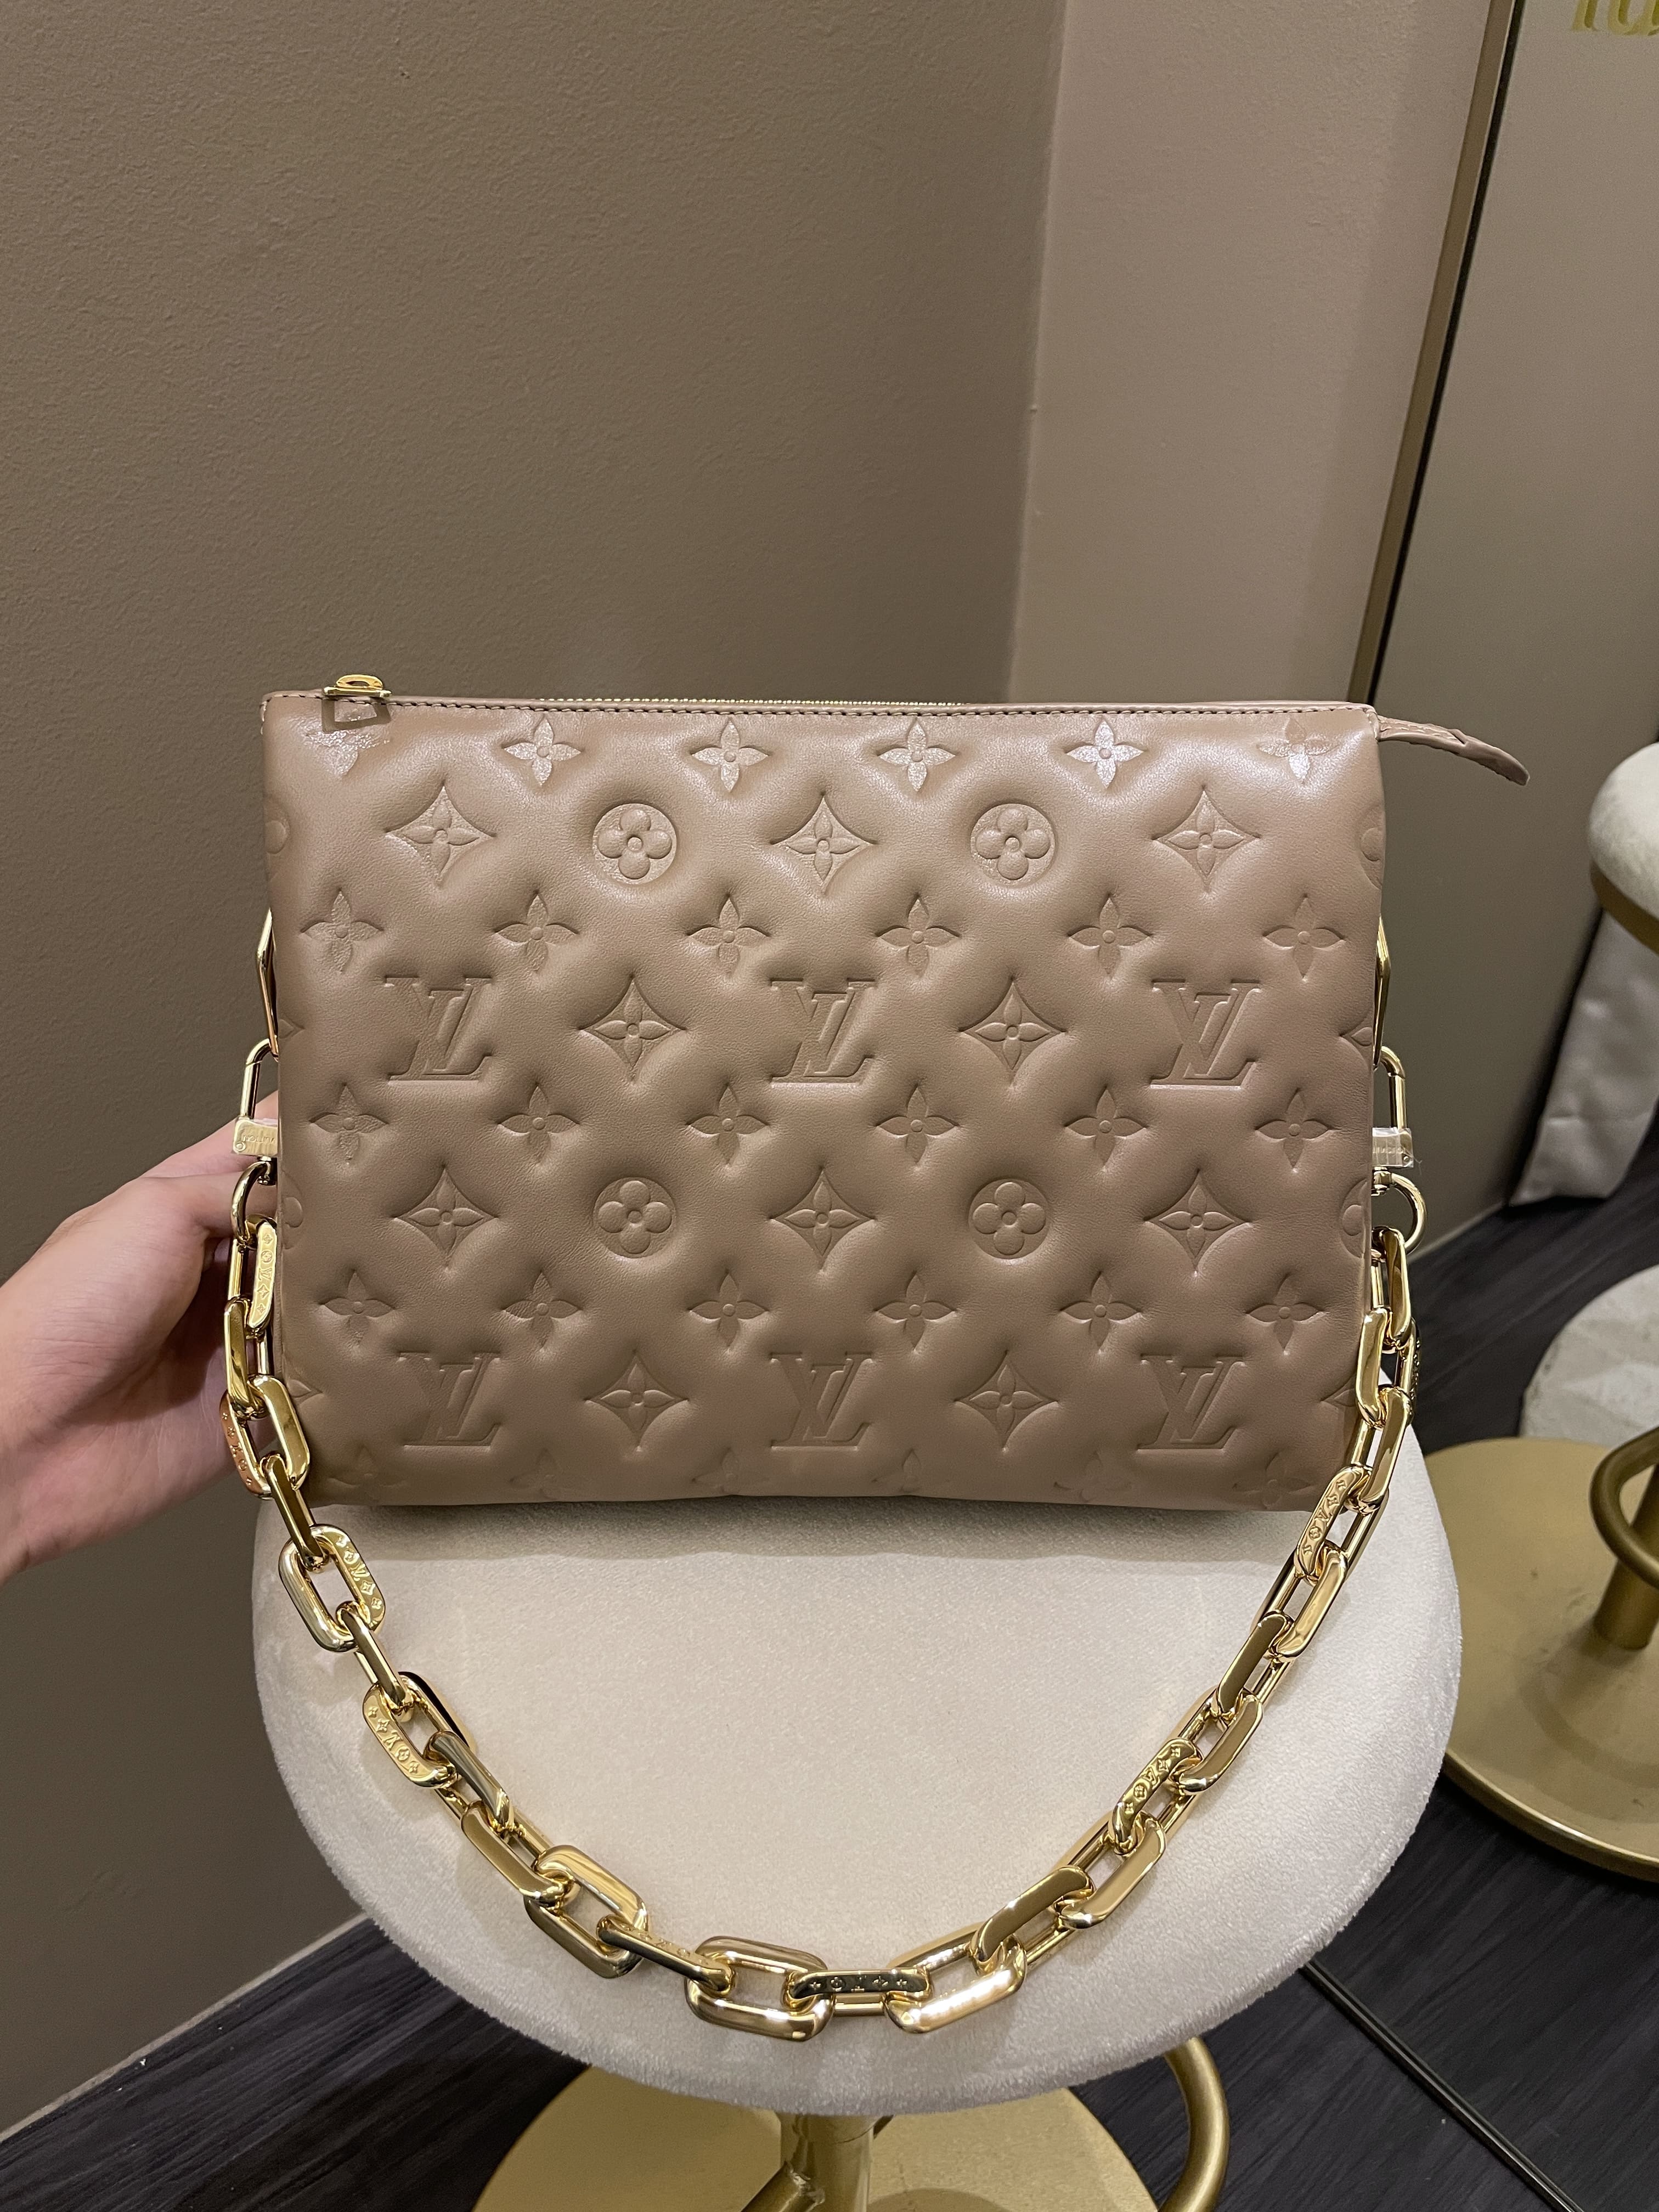 Louis Vuitton Coussin PM Taupe